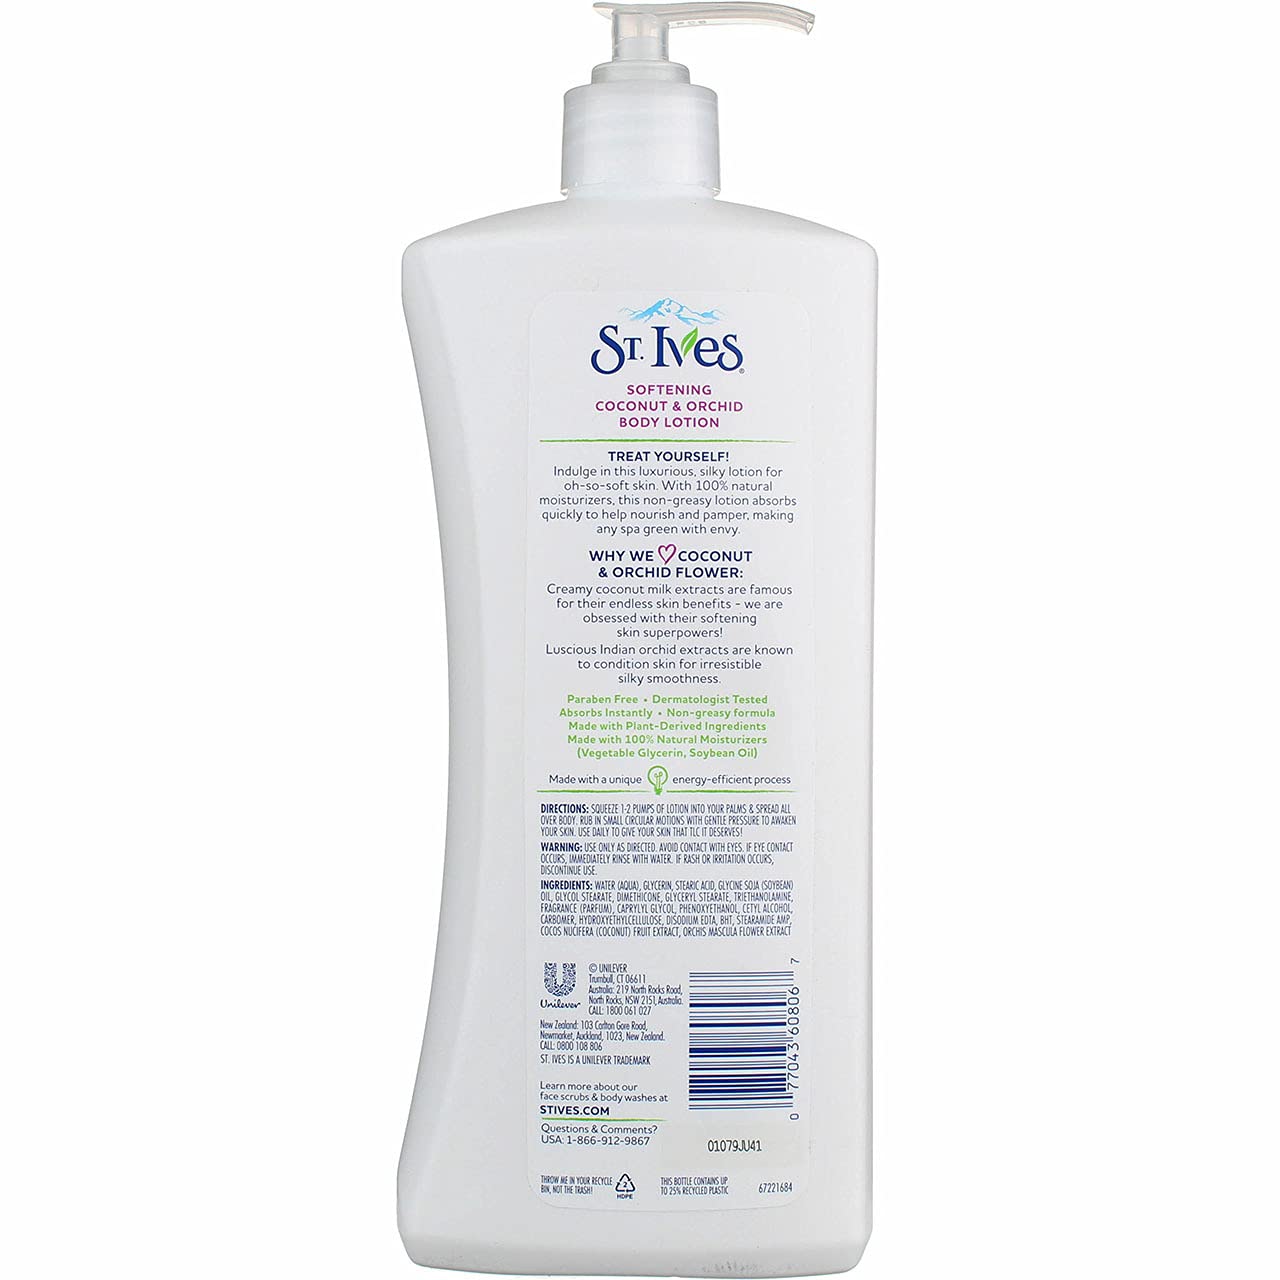 St Ives Softening Coconut and Orchid Body Lotion, 21 Oz - image 2 of 8